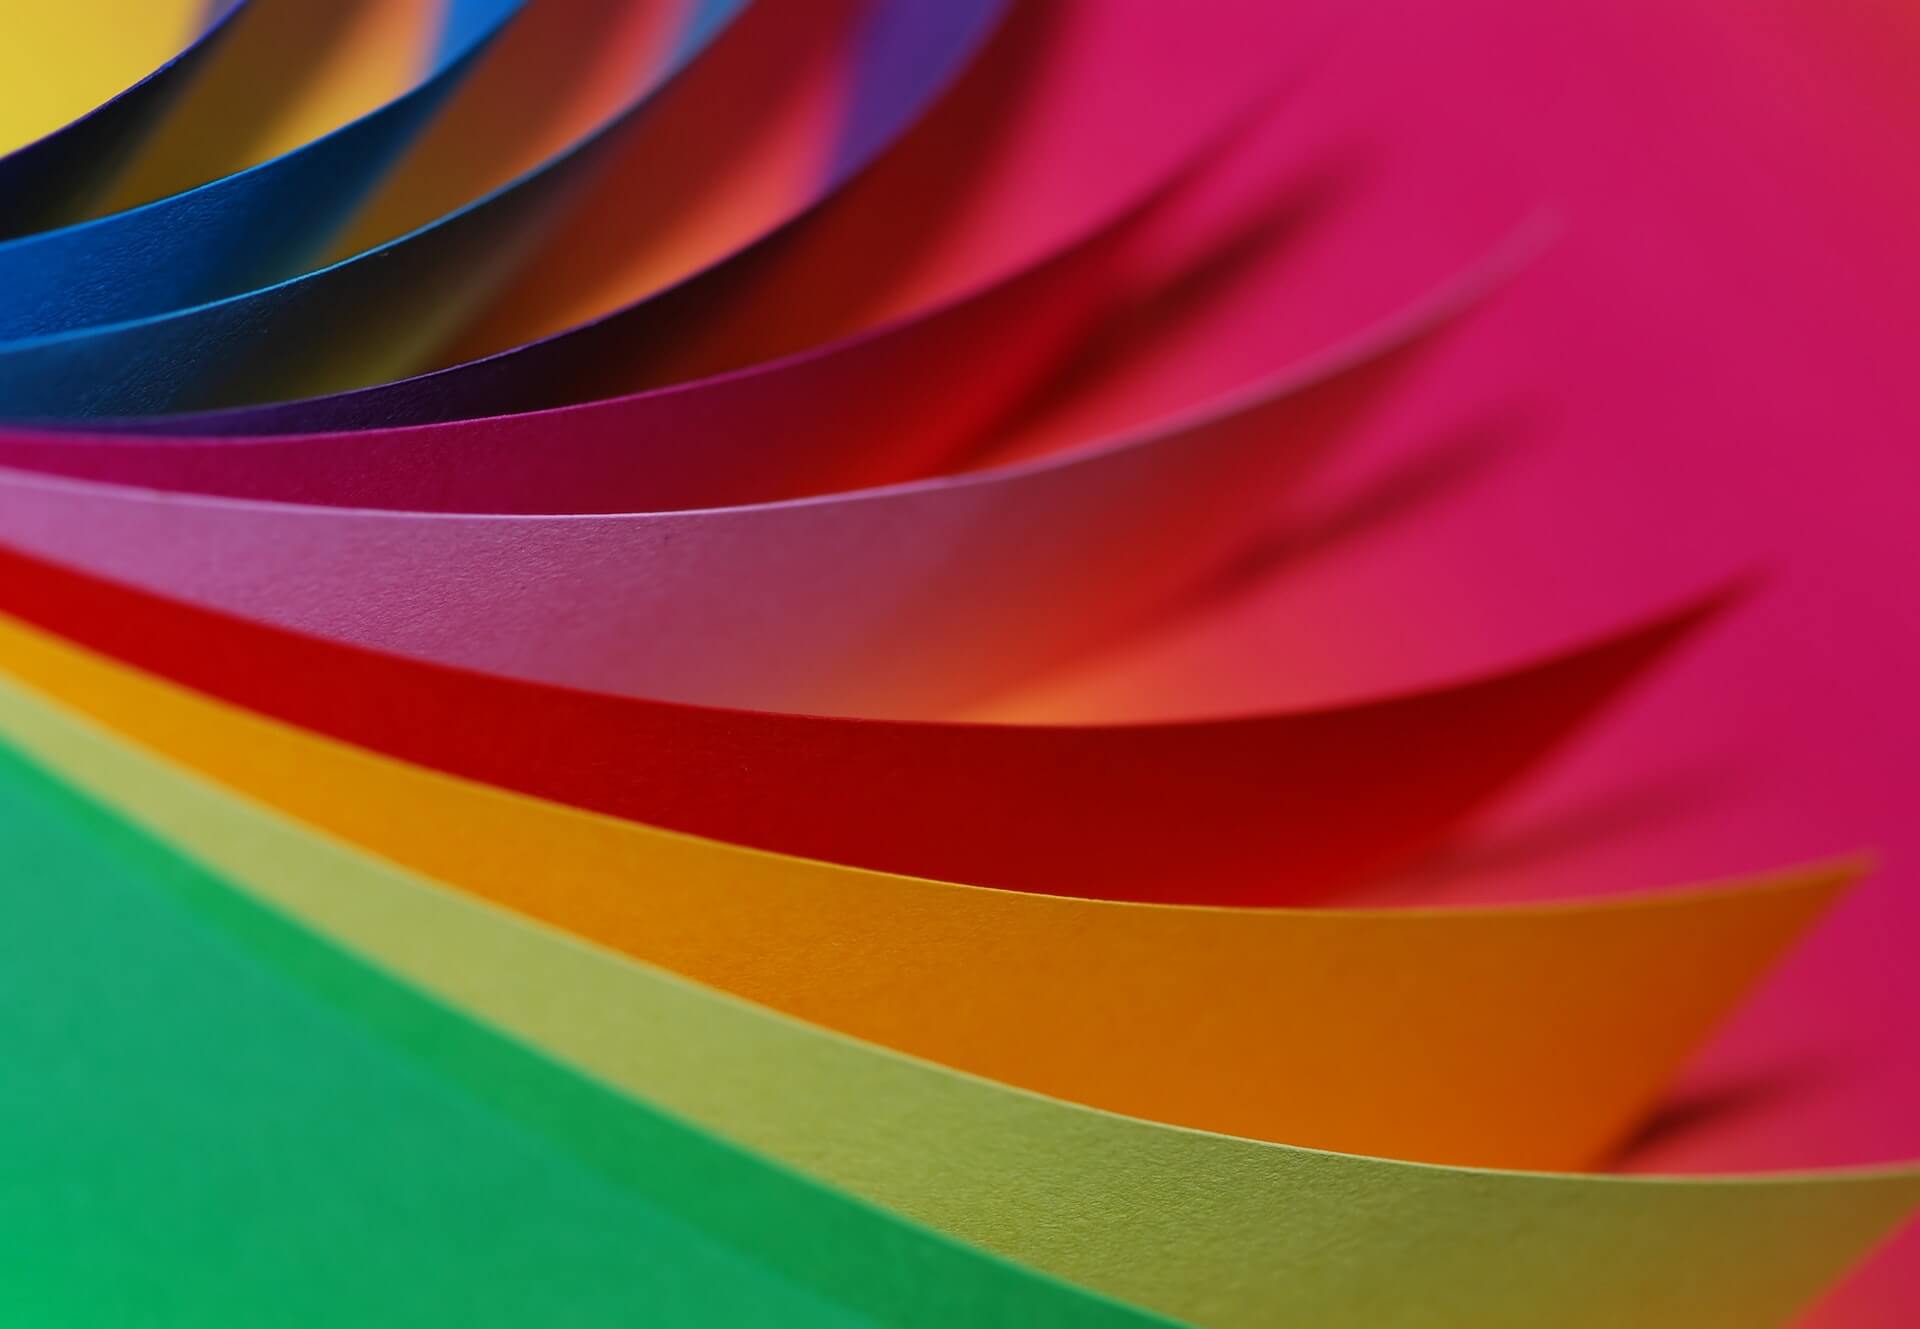 How to choose the best colors for your brand